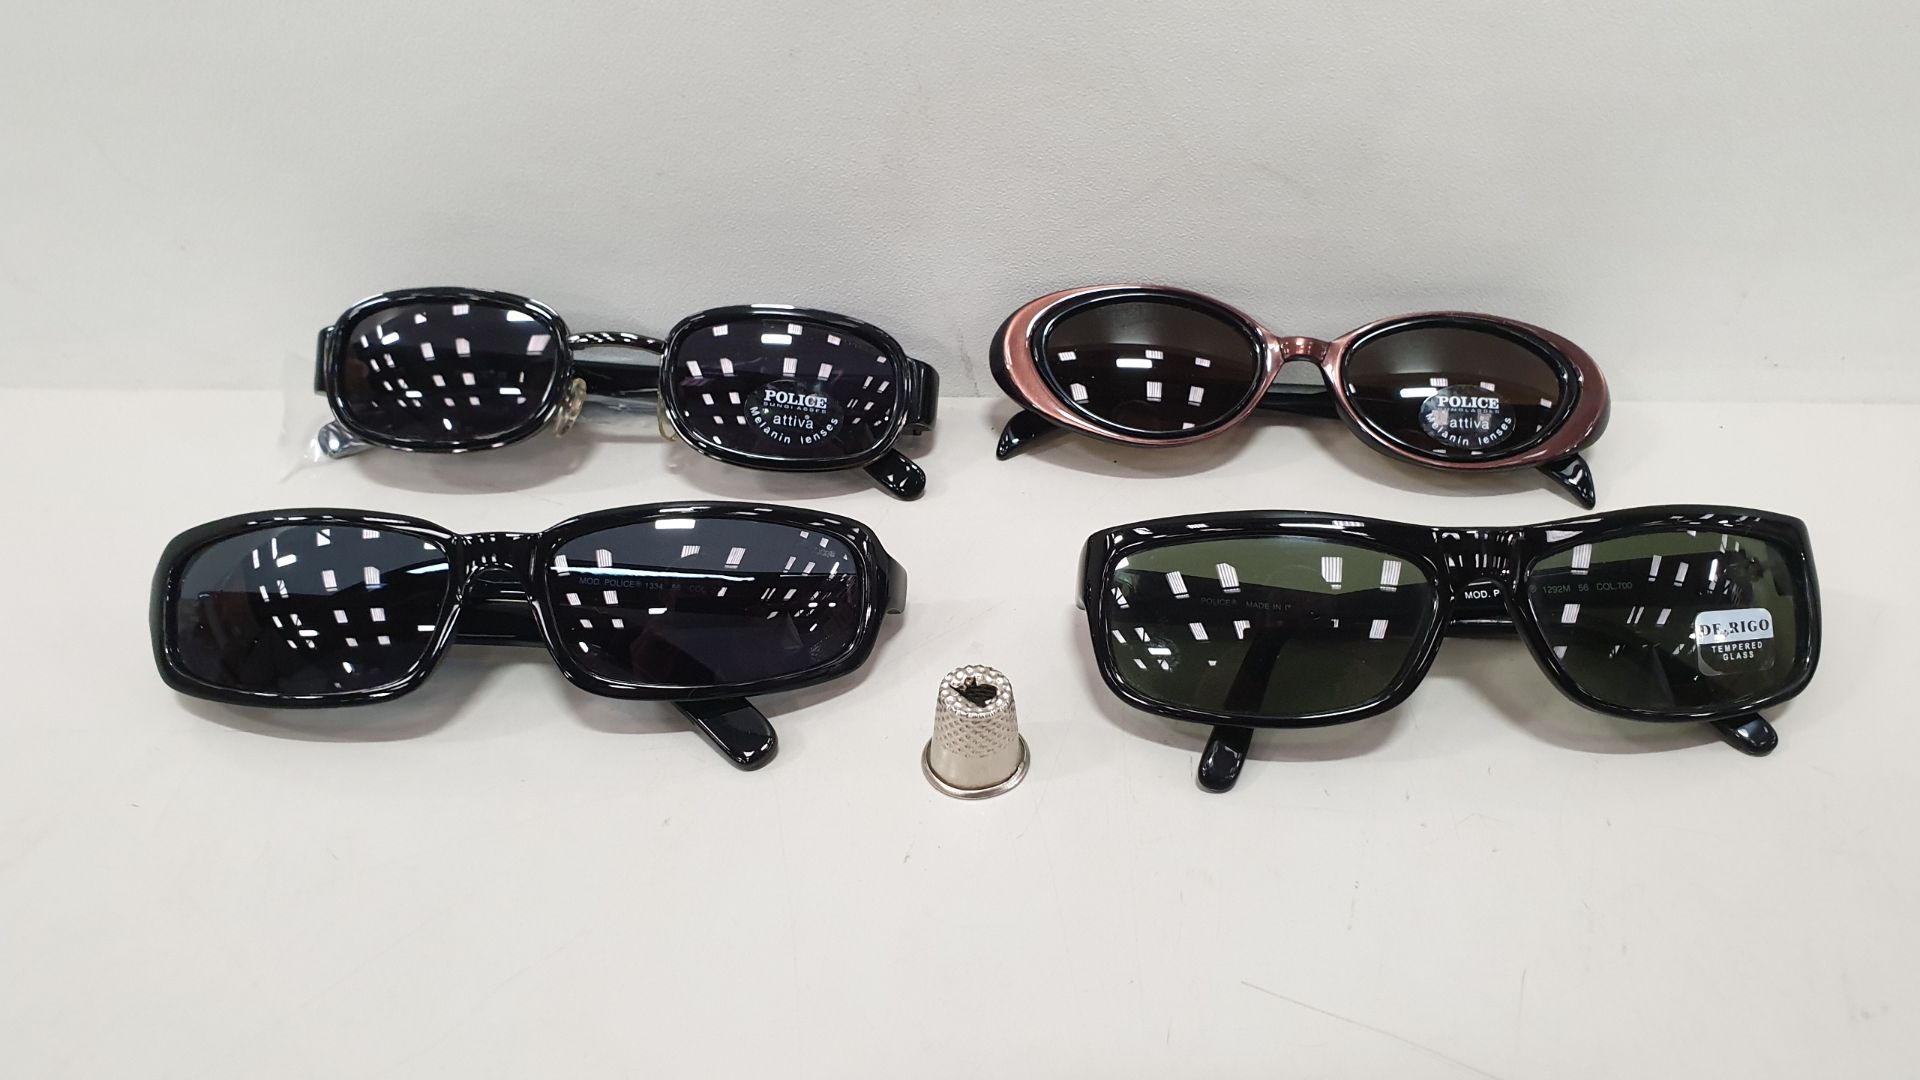 30 X ASSORTED BRAND NEW GENUINE POLICE SUNGLASSES IE. V2447/0508,S1334/0242 - IN 2 BOXES